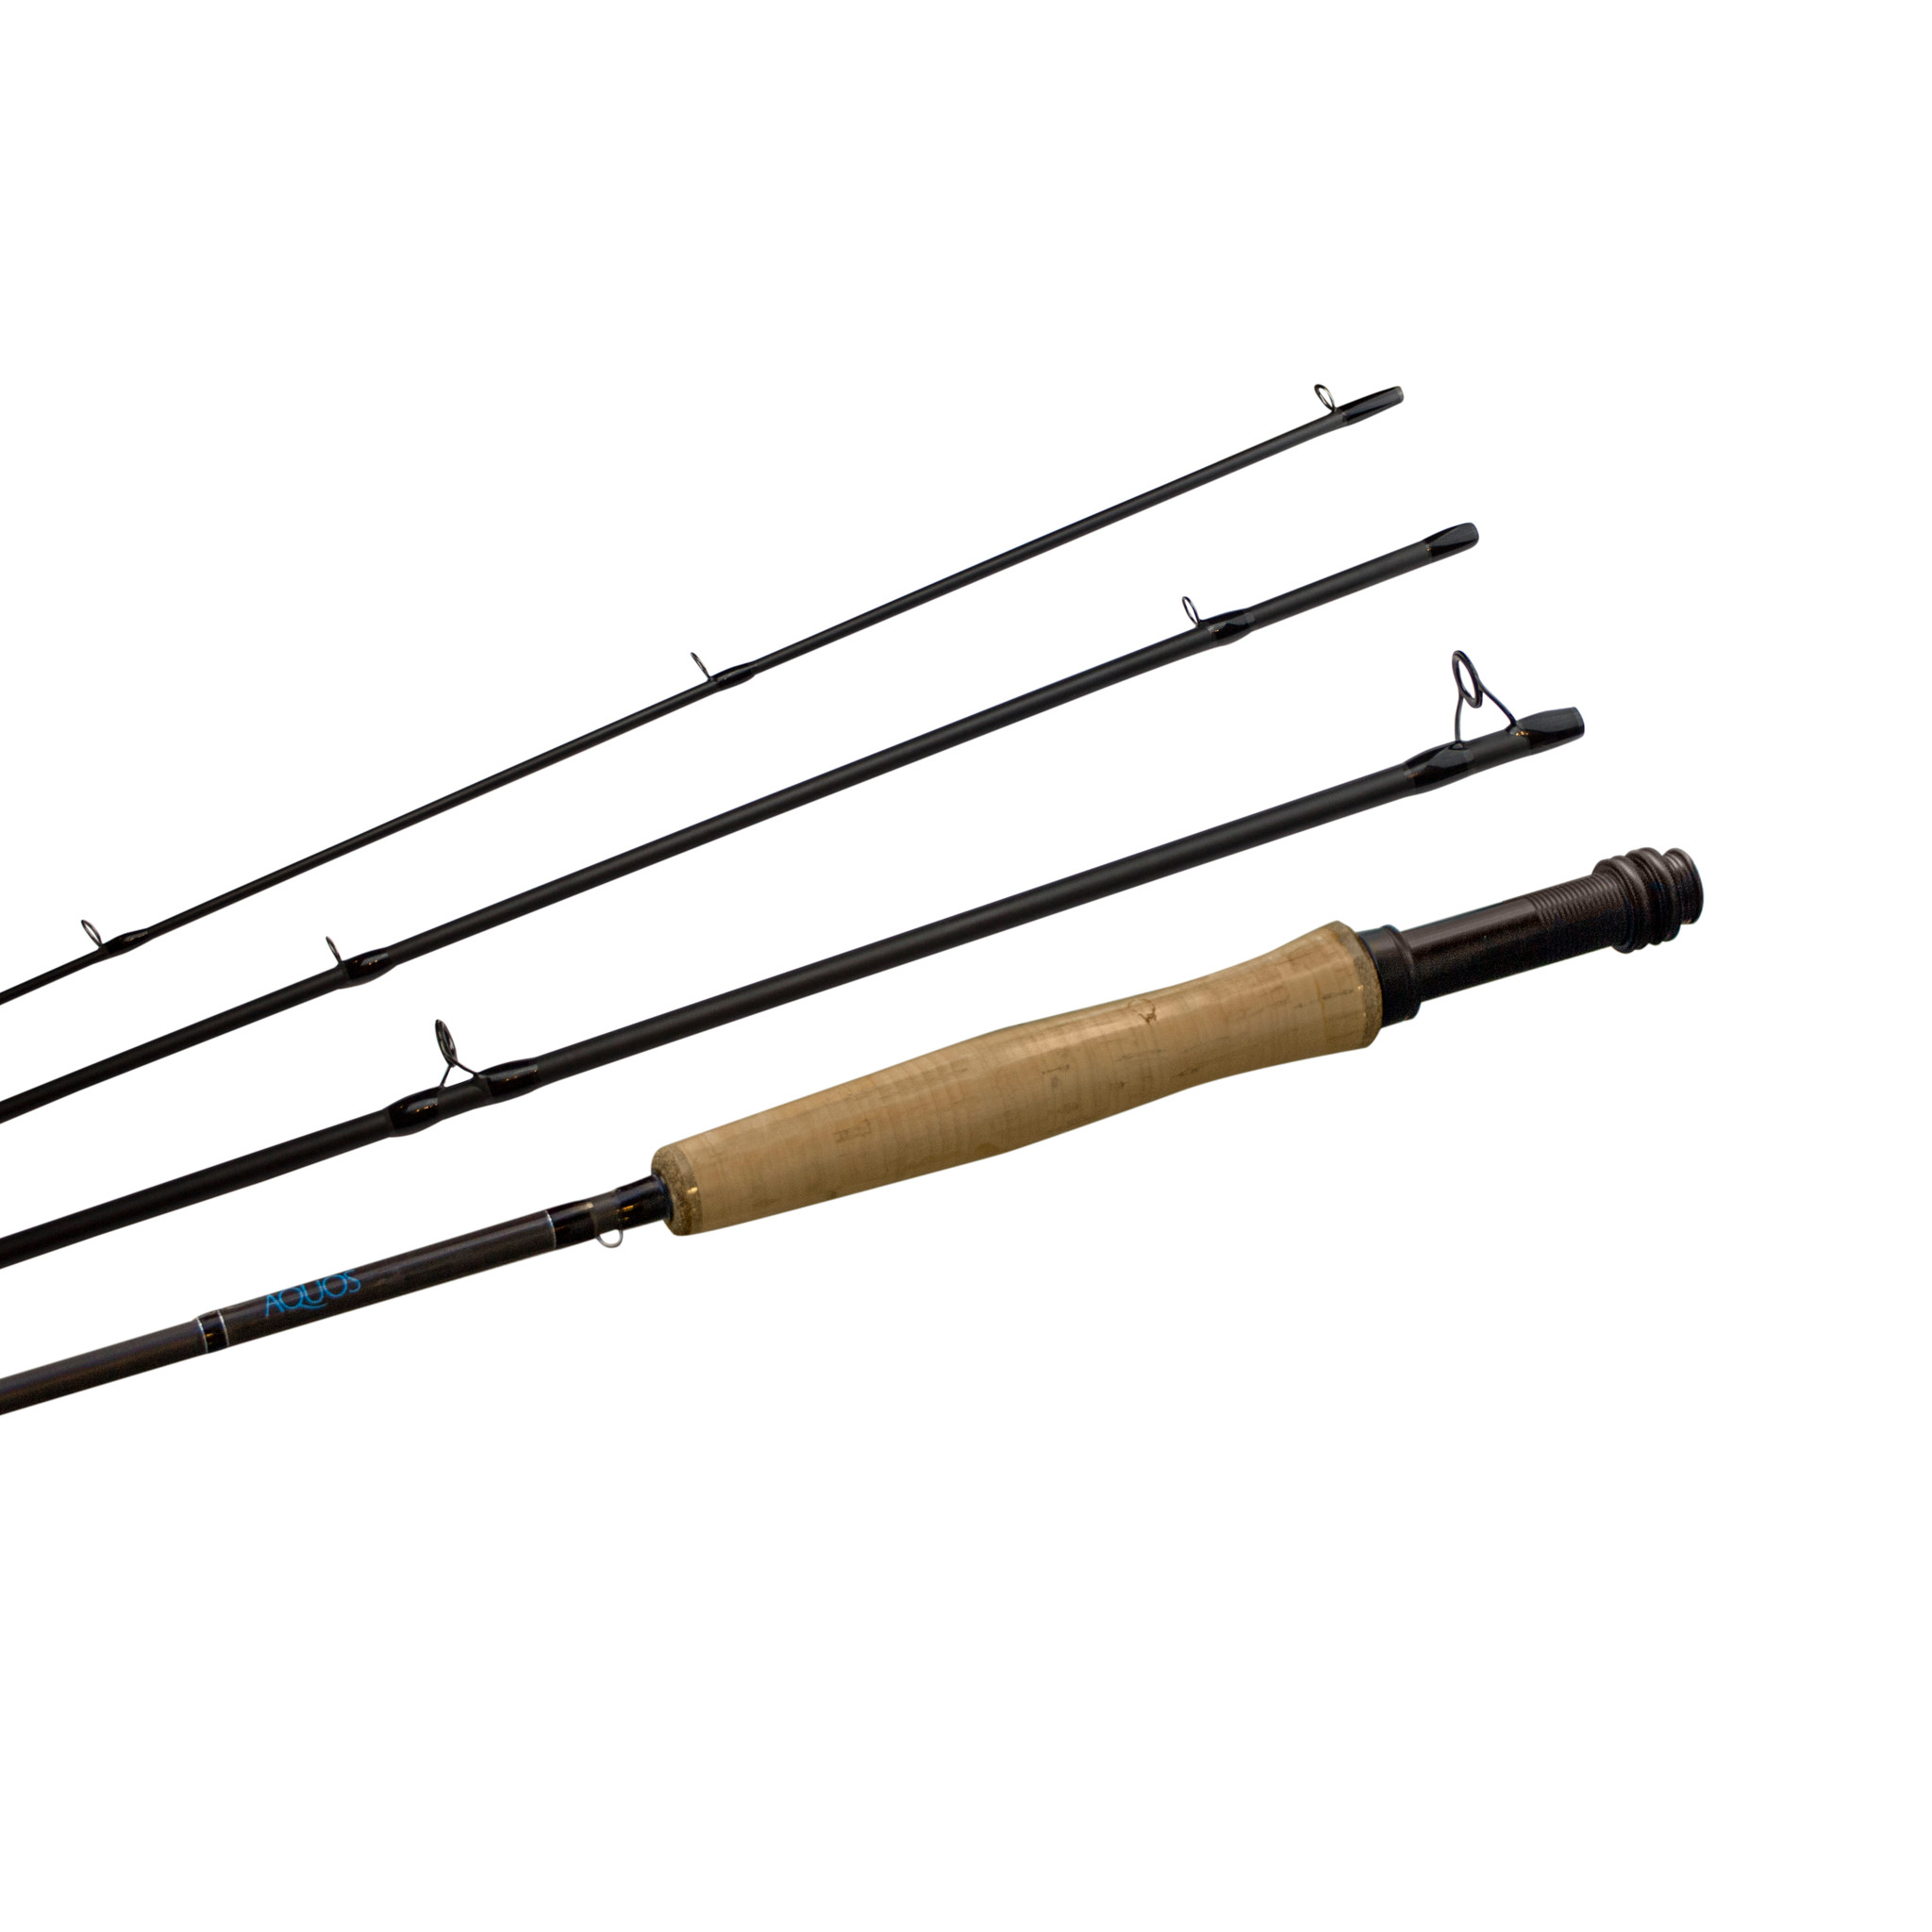 Syndicate Aquos Series Fly Fishing Rod for Sale